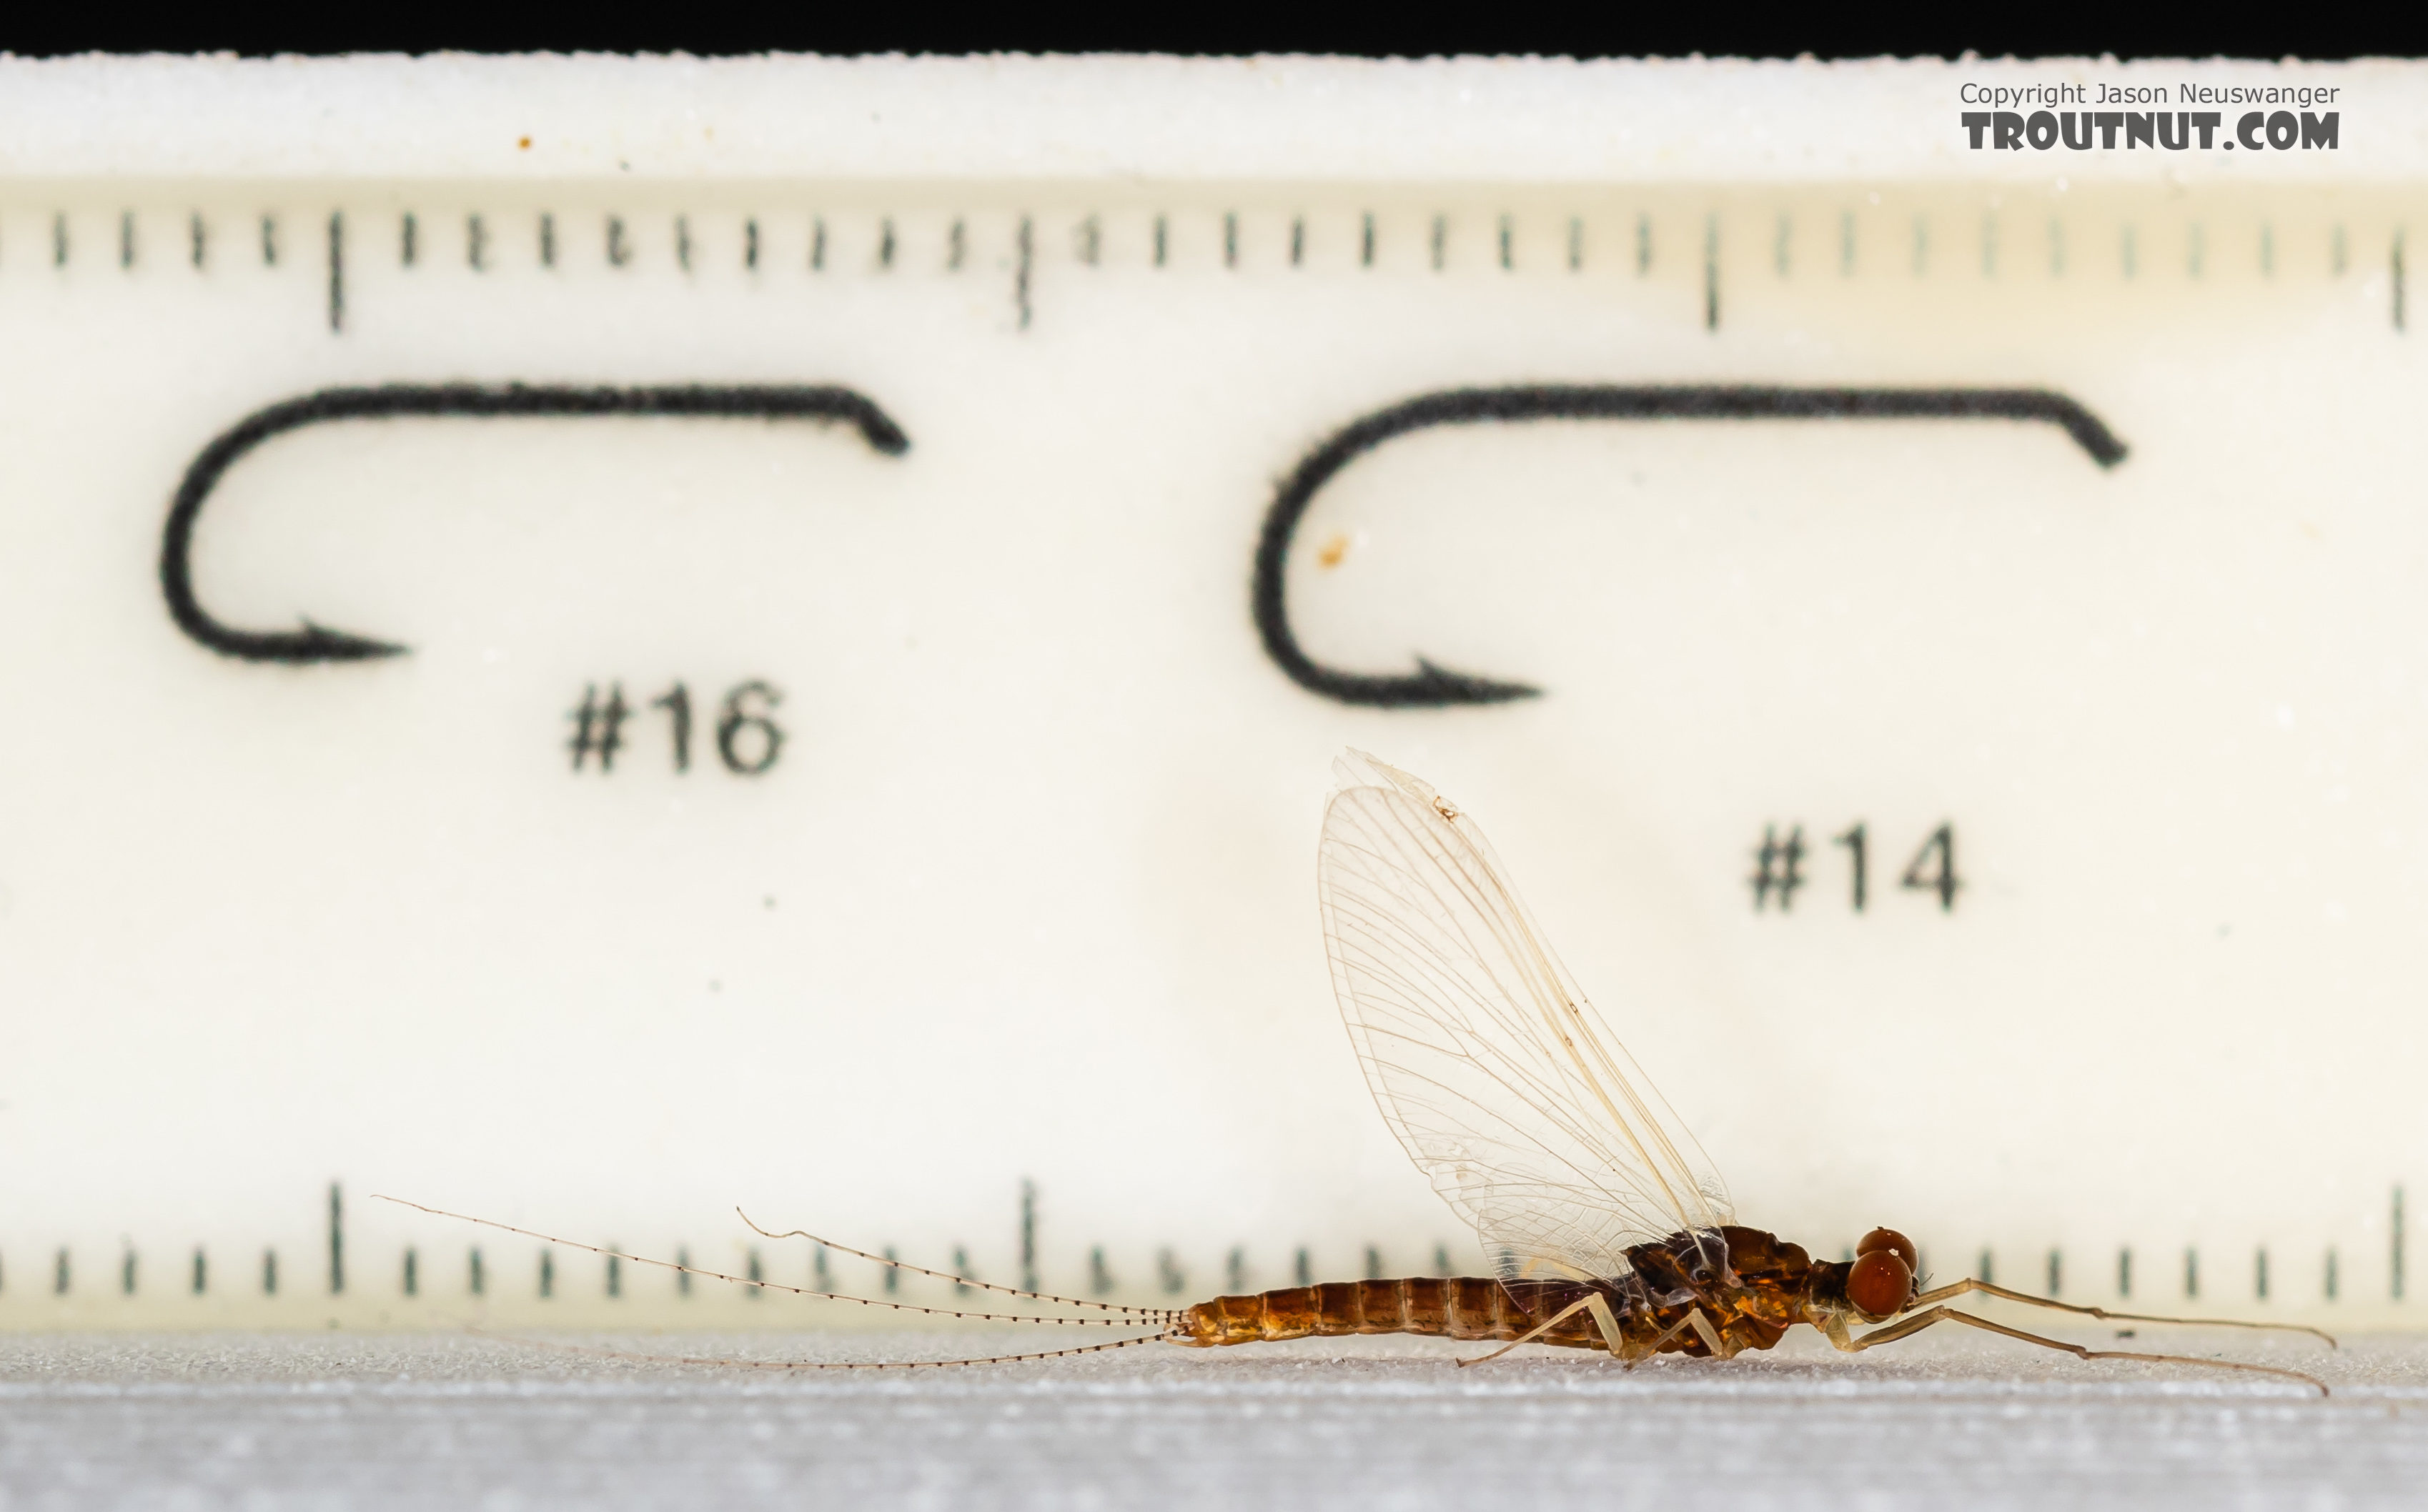 Male Ephemerella dorothea infrequens (Pale Morning Dun) Mayfly Spinner from the Madison River in Montana